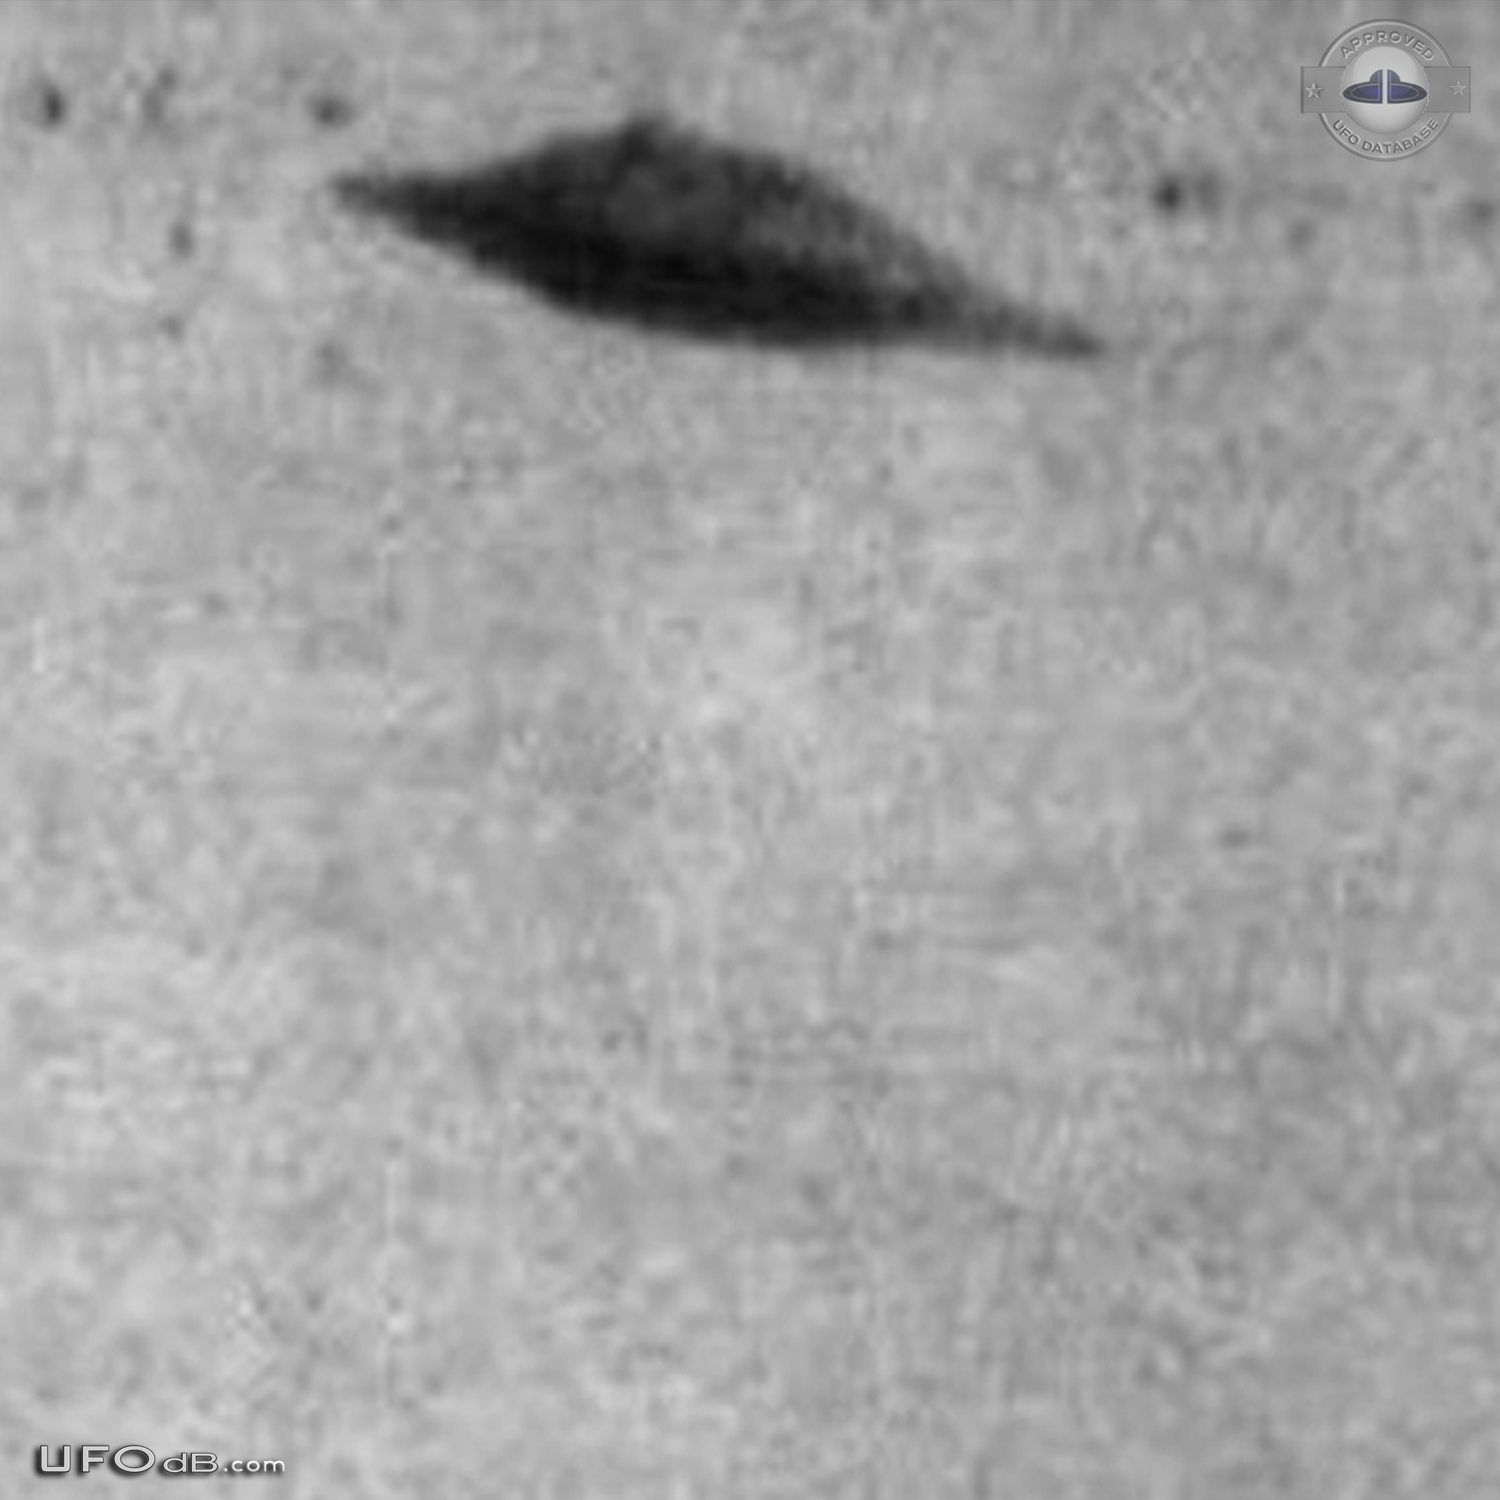 Old 1978 double Saucer UFO picture from Renalegh, Buenos Aires UFO Picture #491-3